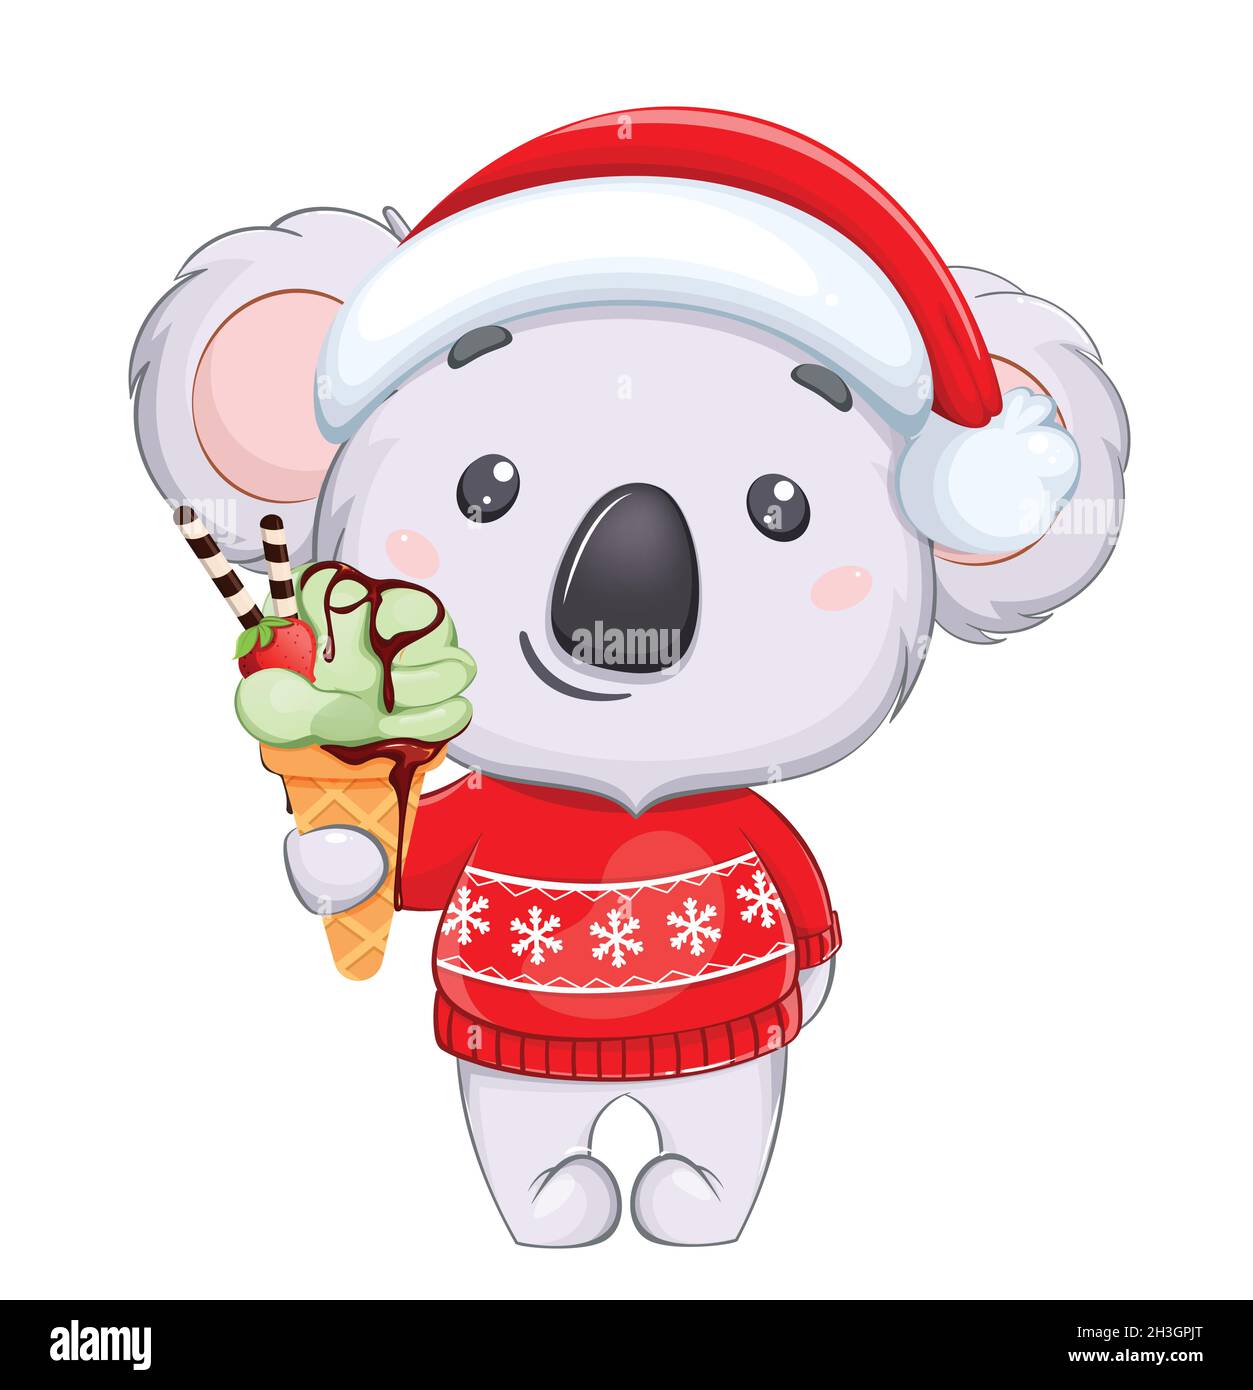 Merry Christmas and Happy New Year. Funny koala in Santa hat and red sweater holding ice-cream. Cute cartoon character. Stock vector illustration Stock Vector